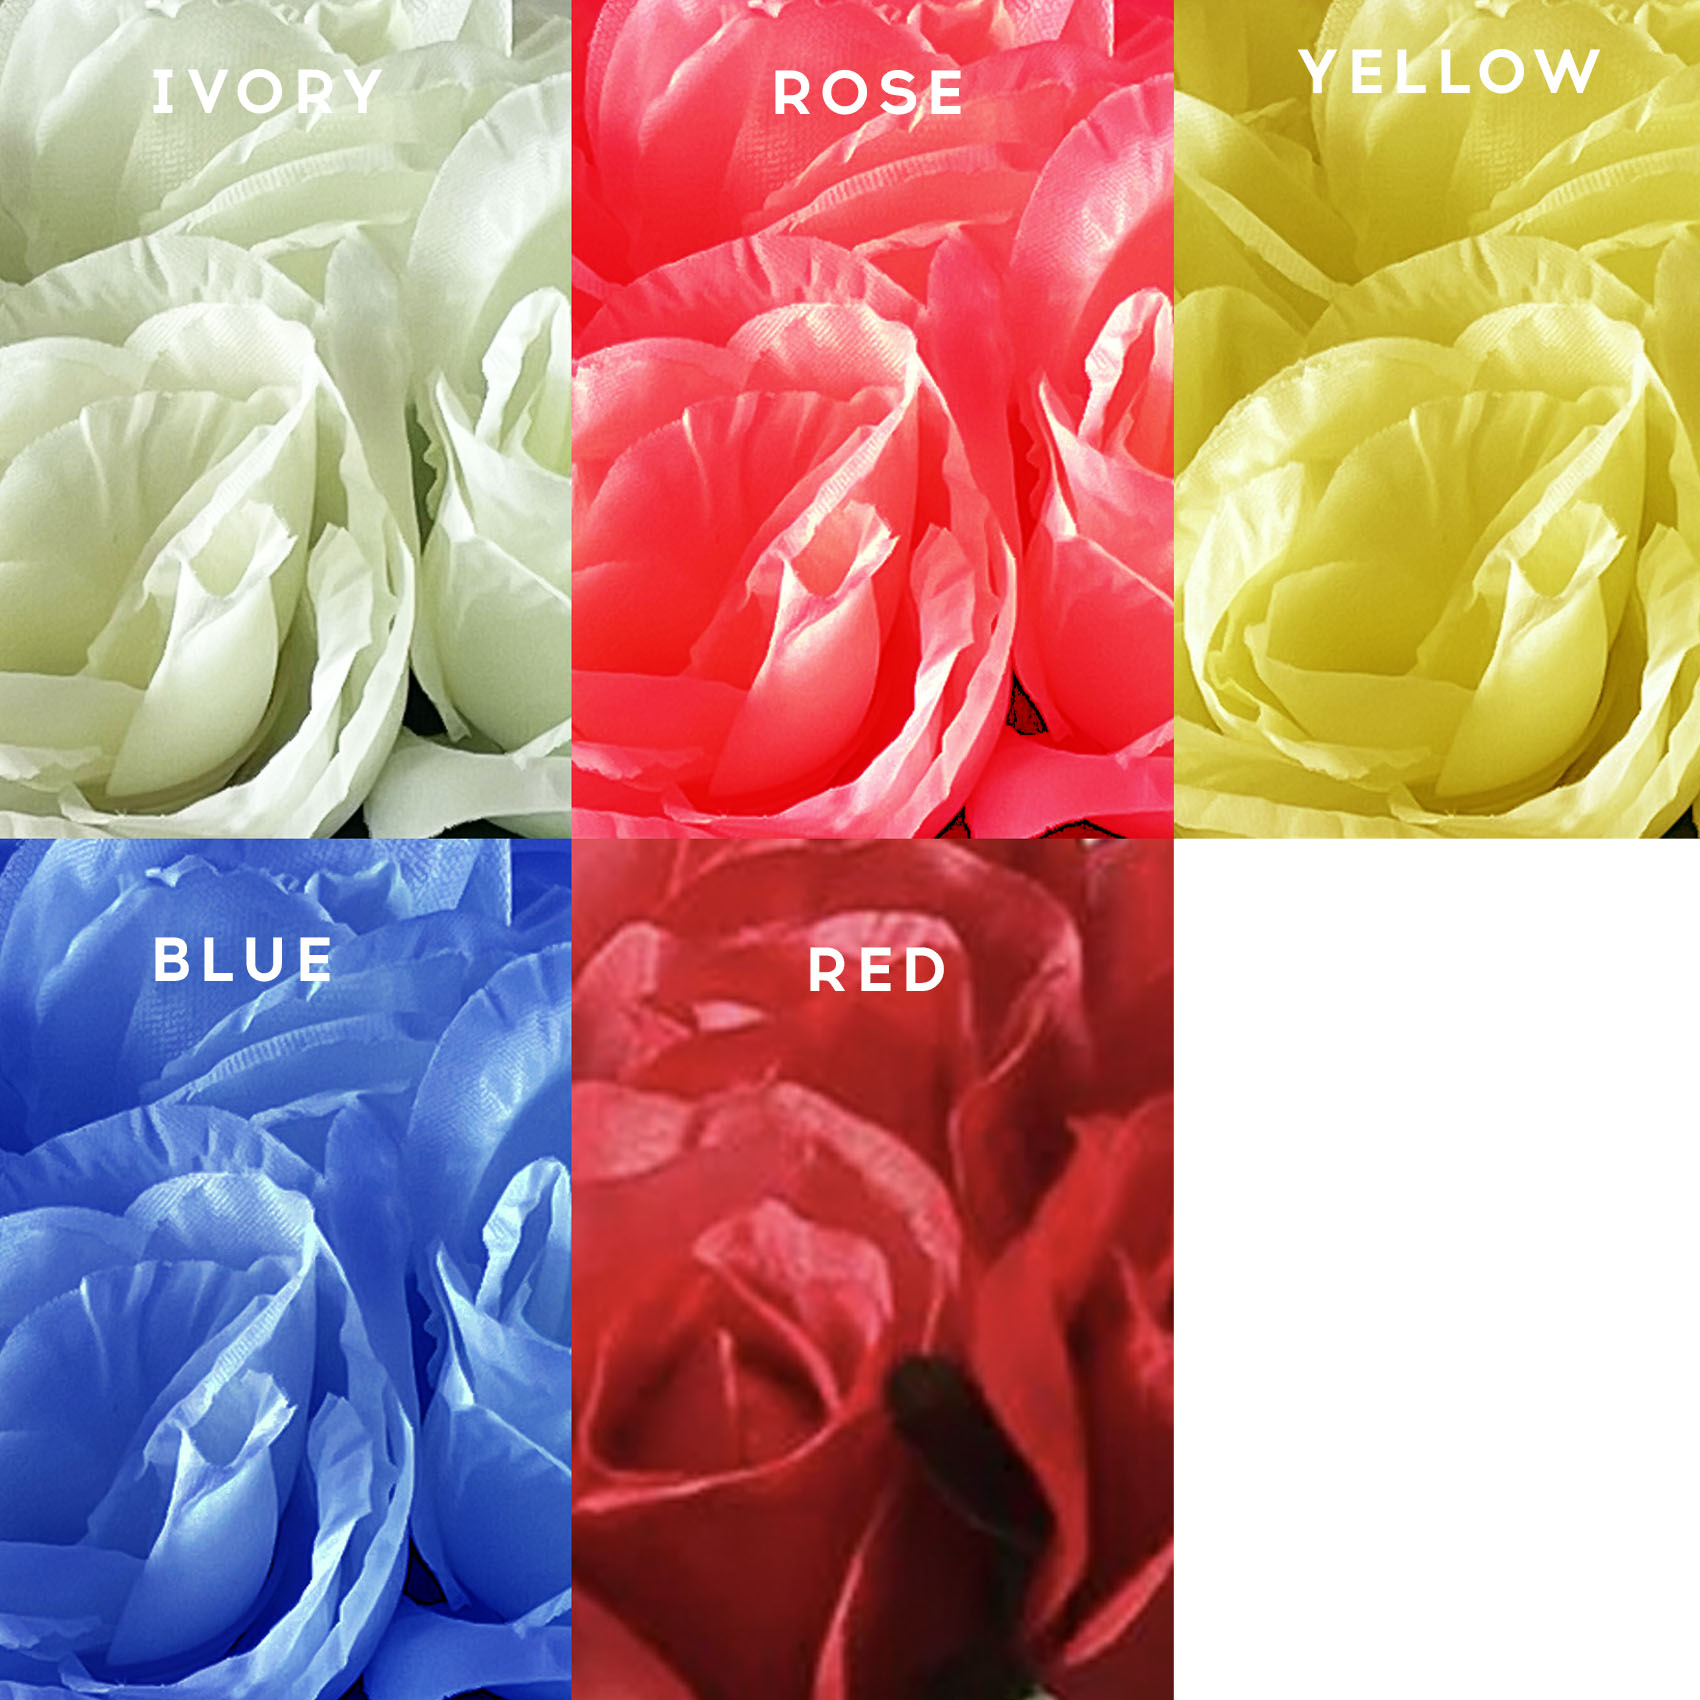 Available rose flower colors